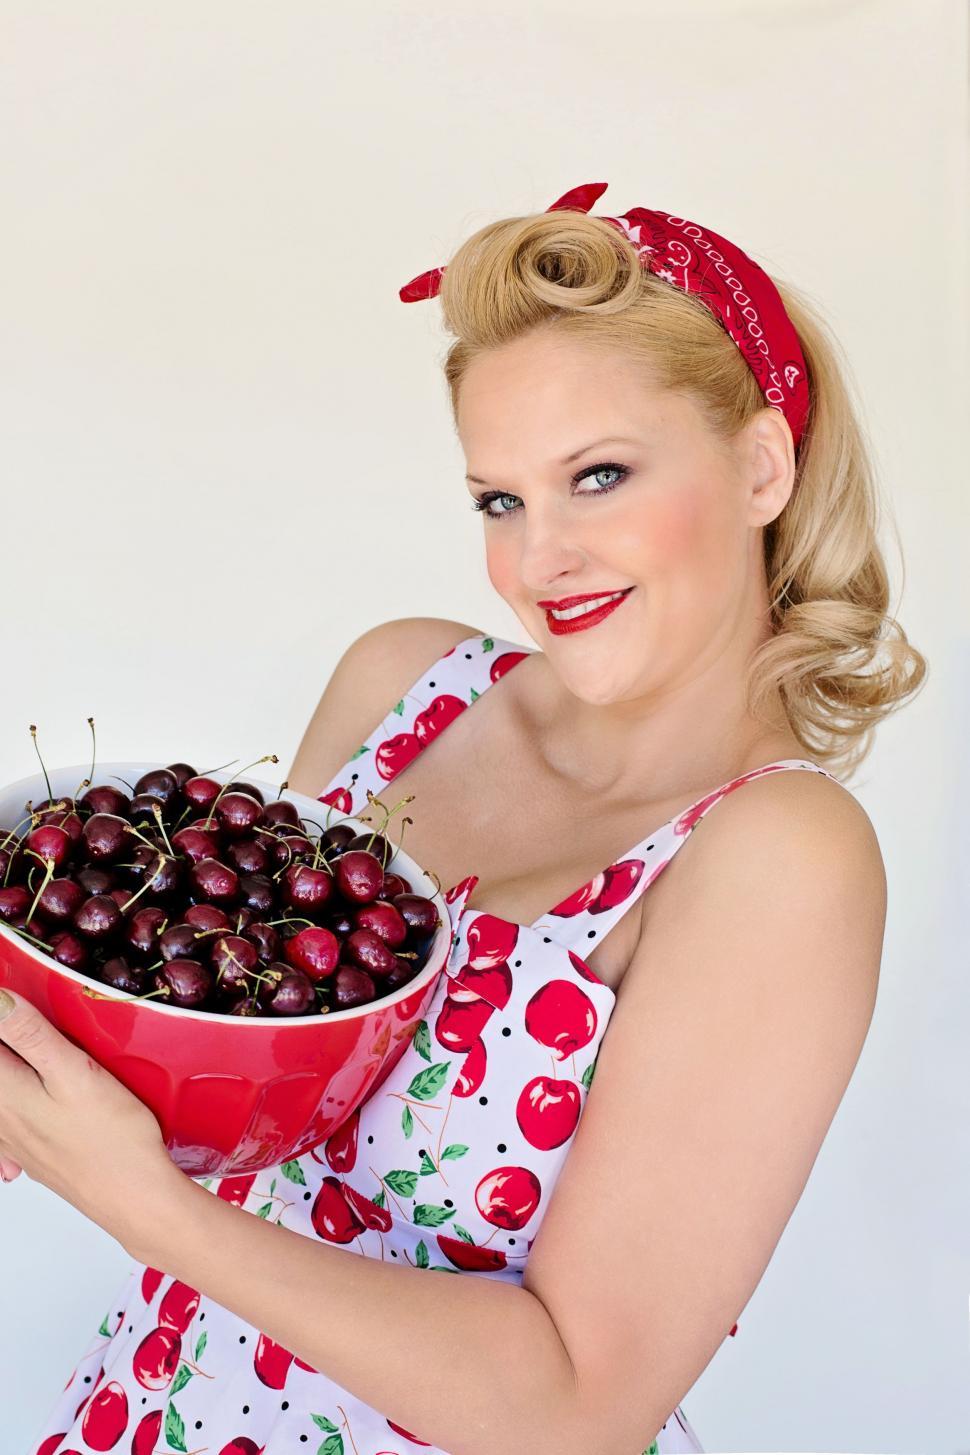 Free Image of Smiling Blonde Woman With Bowl of Cherries - Looking at camera 